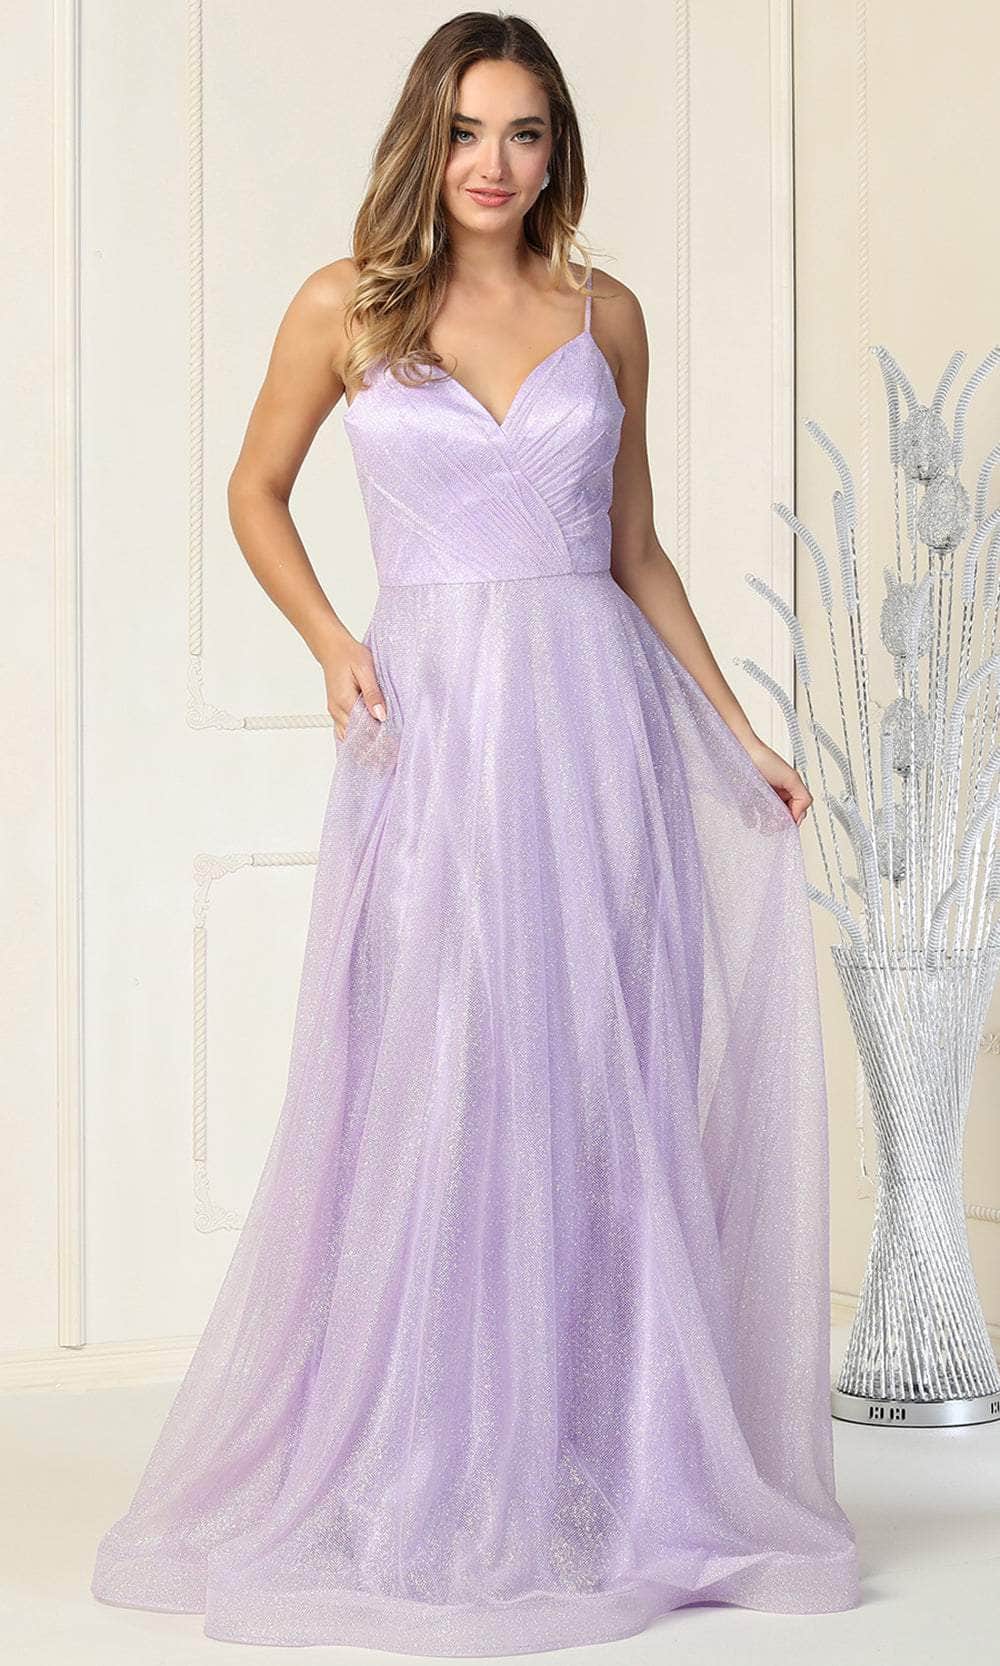 May Queen MQ1838 - Sleeveless Glittered Tulle Surplice Evening Gown Special Occasion Dress 4 / Lilac